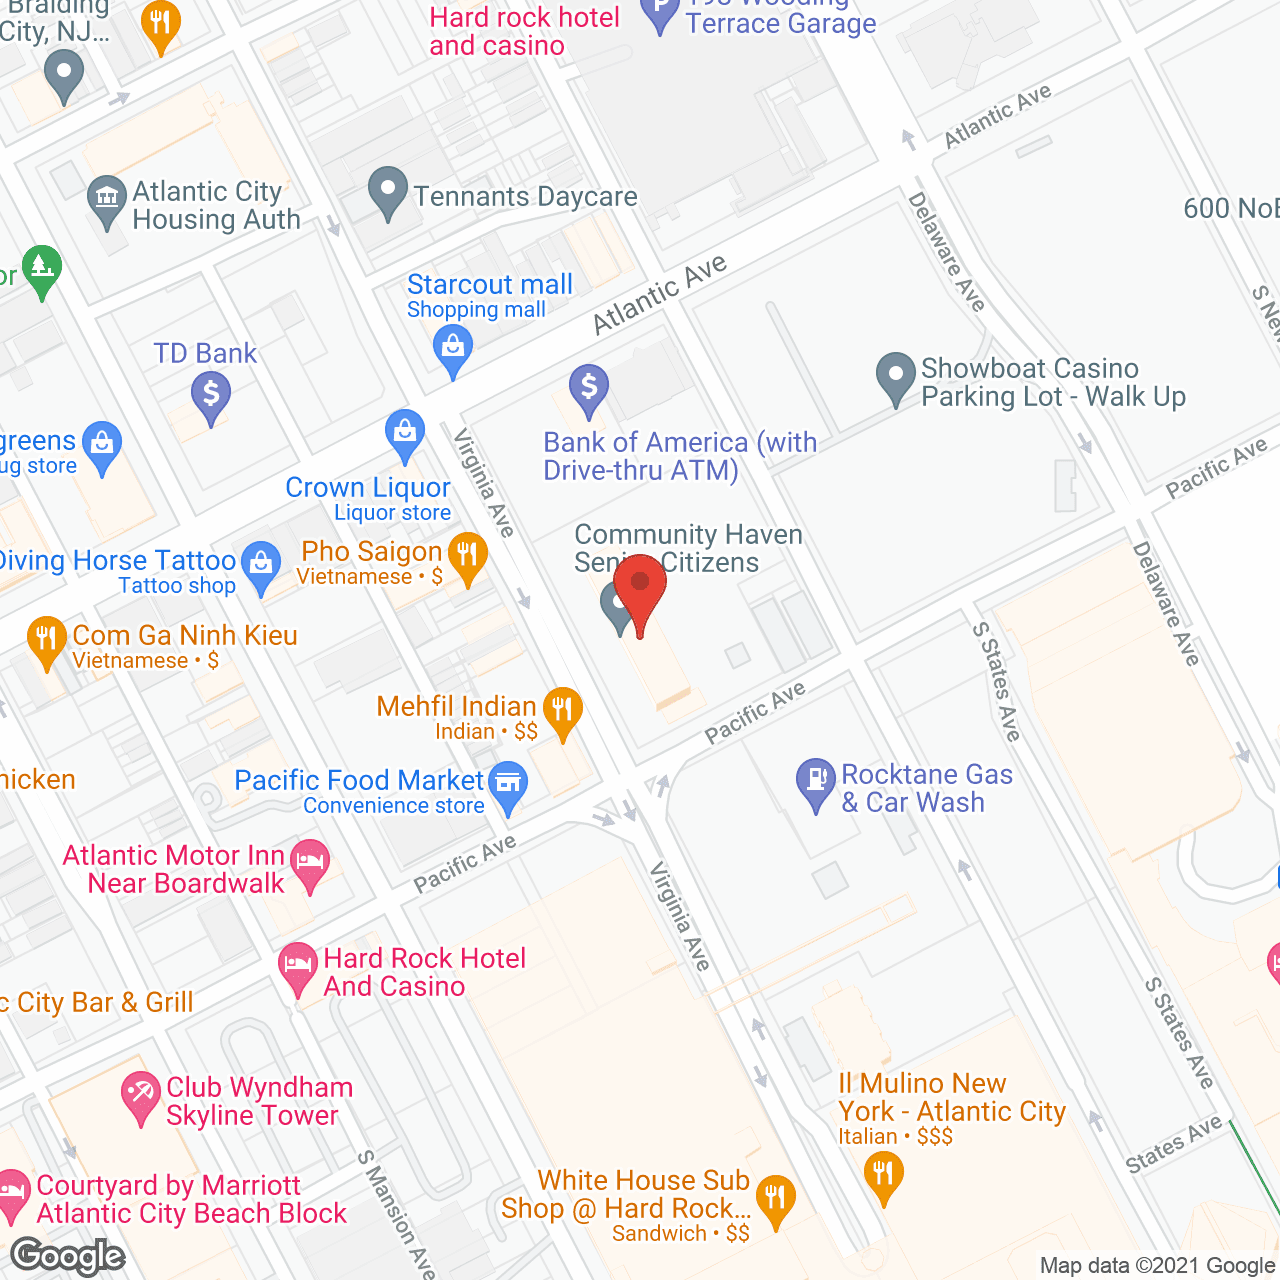 Community Haven in google map